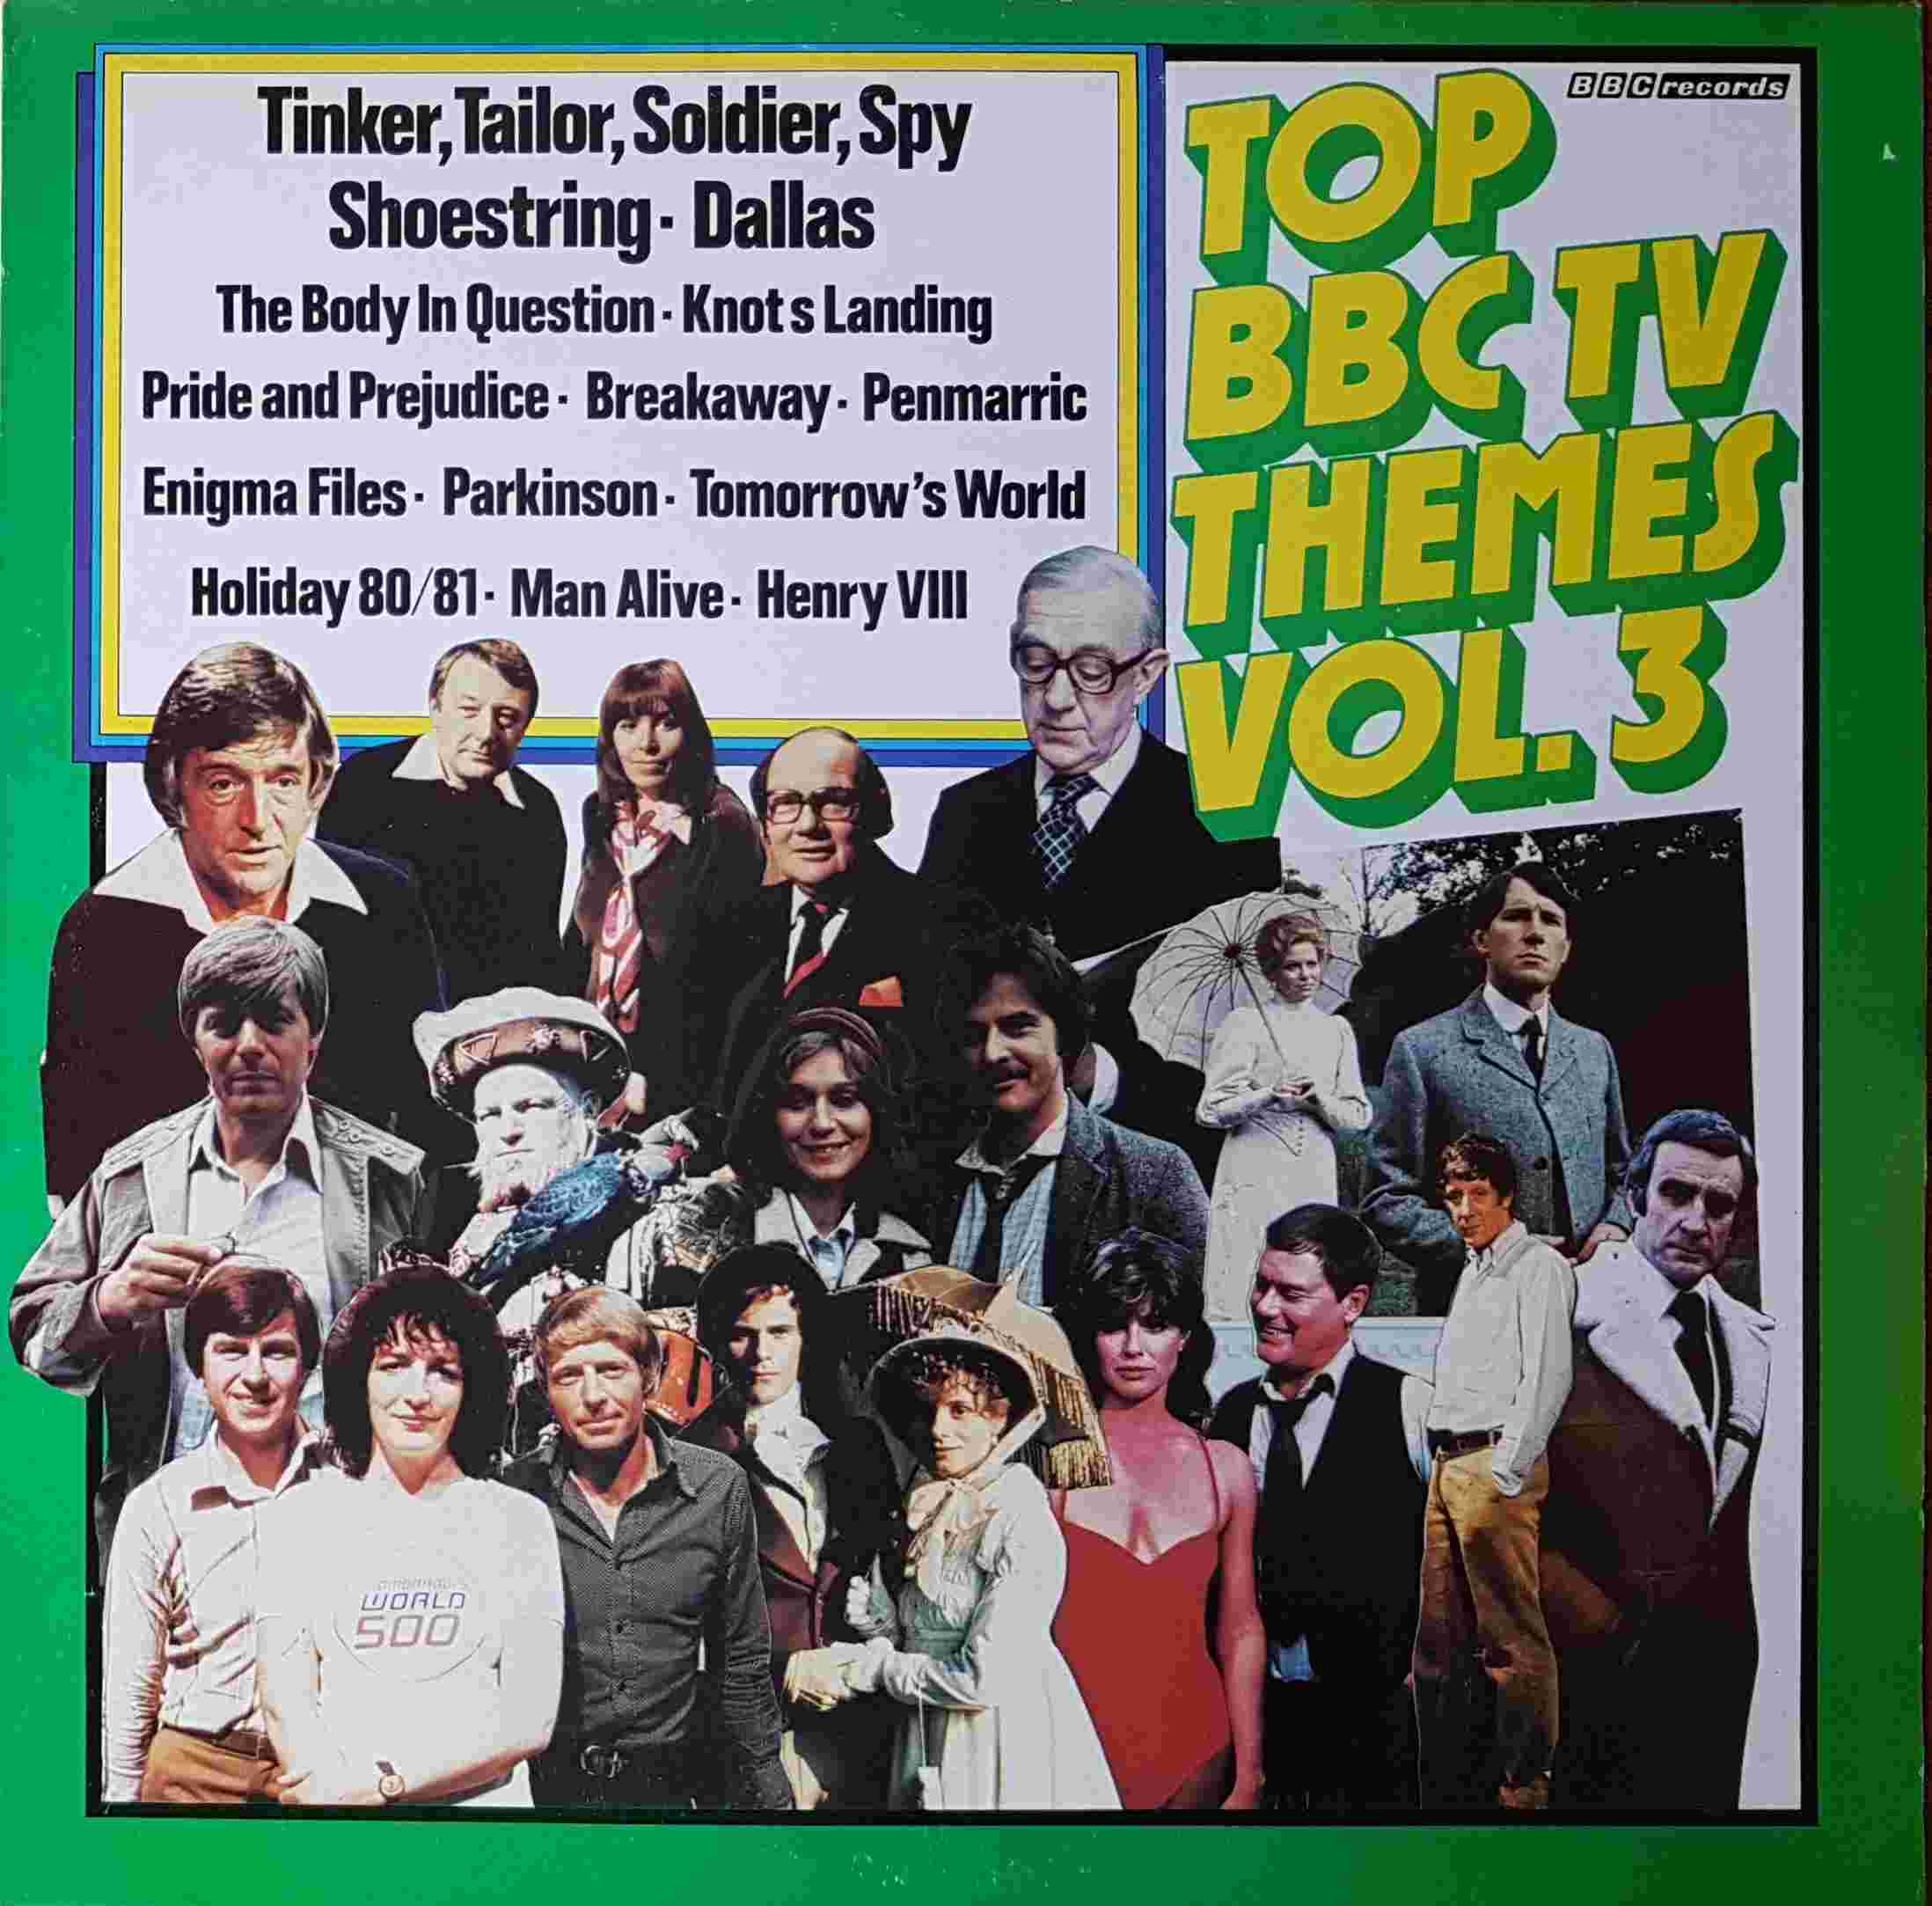 Picture of REH 391 Top BBC TV themes - Volume 3 by artist Various from the BBC albums - Records and Tapes library